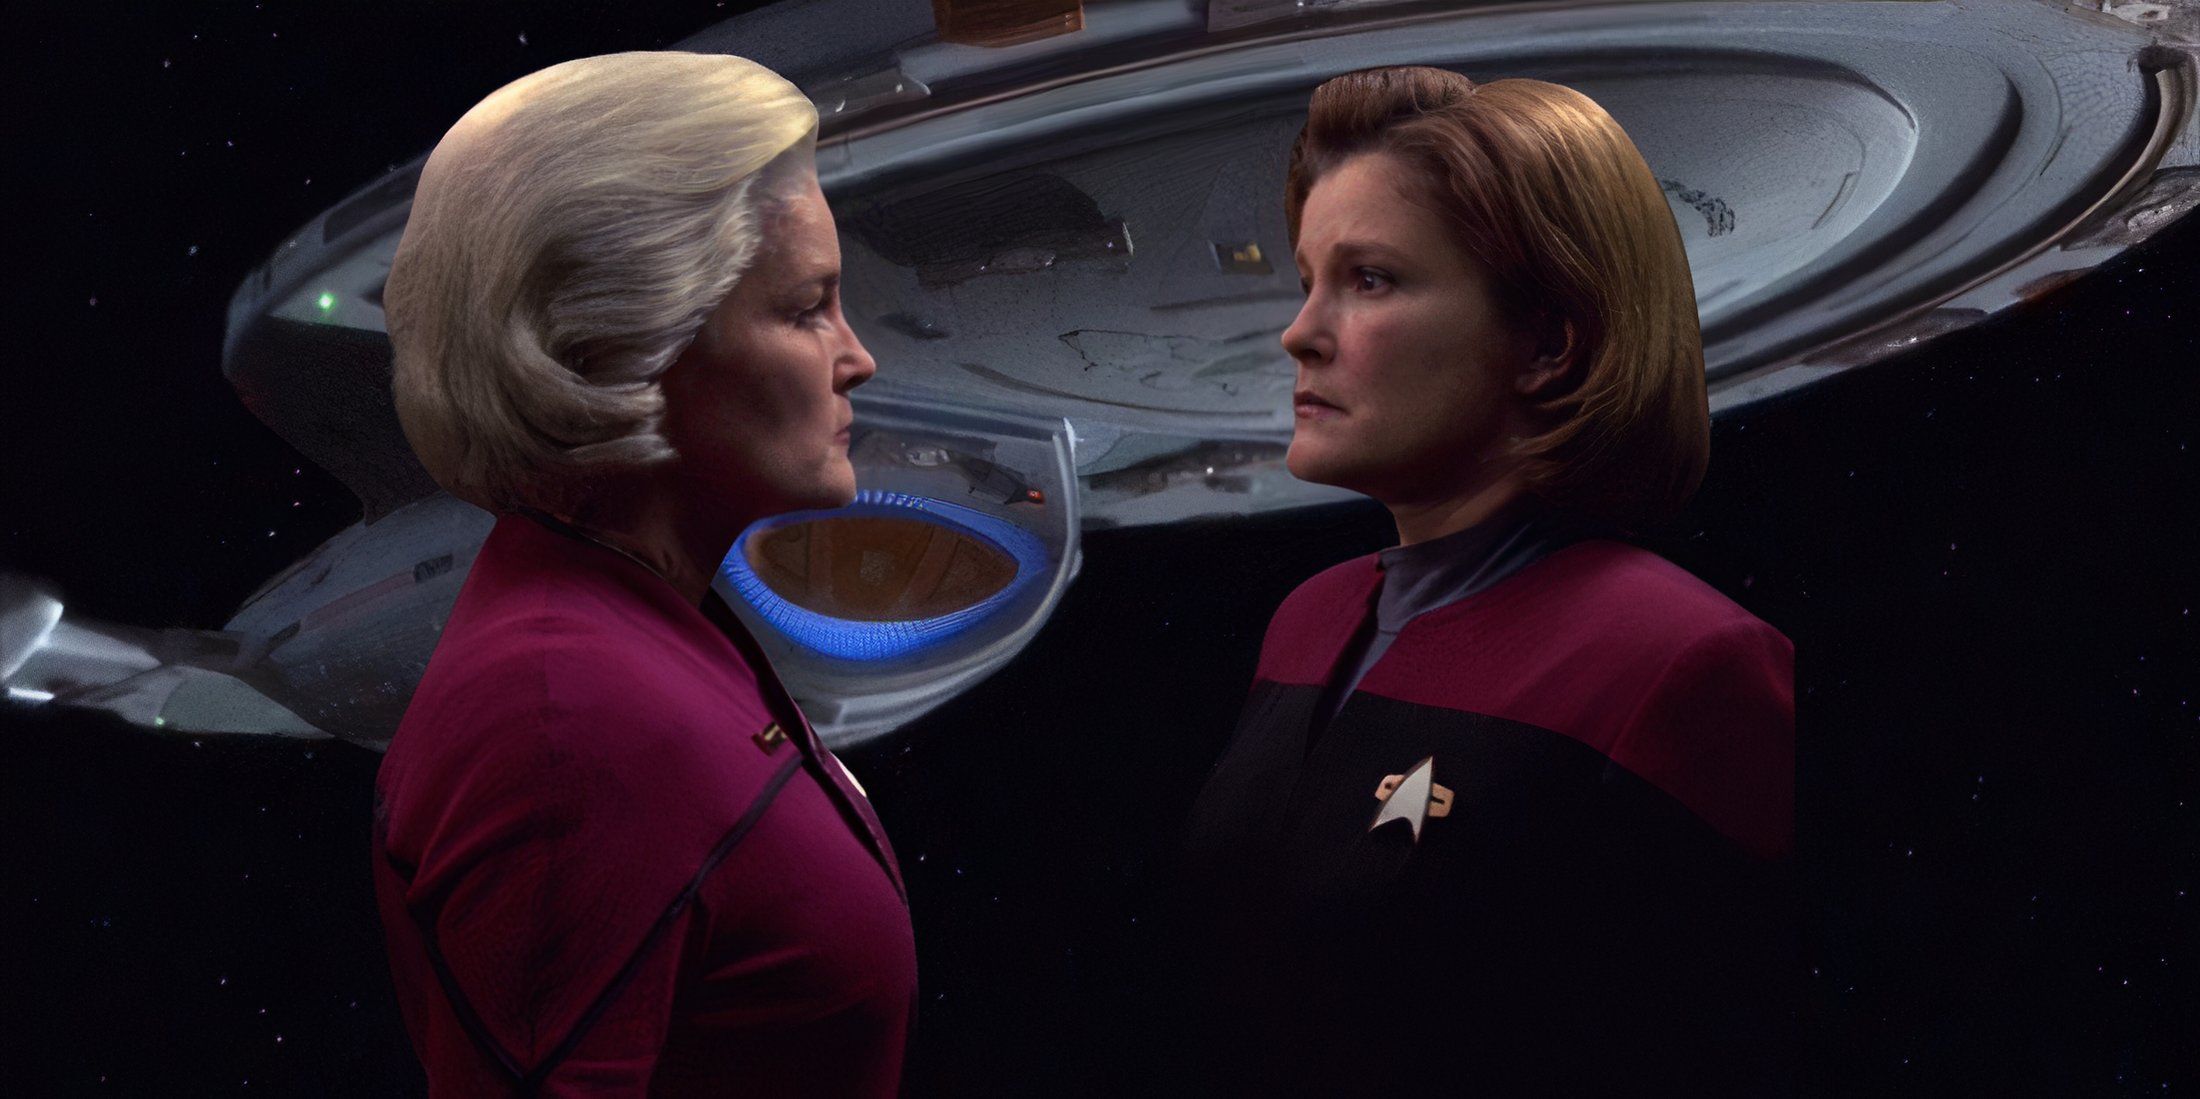 Star Trek: Voyager. Captain Janeway faces Admiral Janeway from the future.